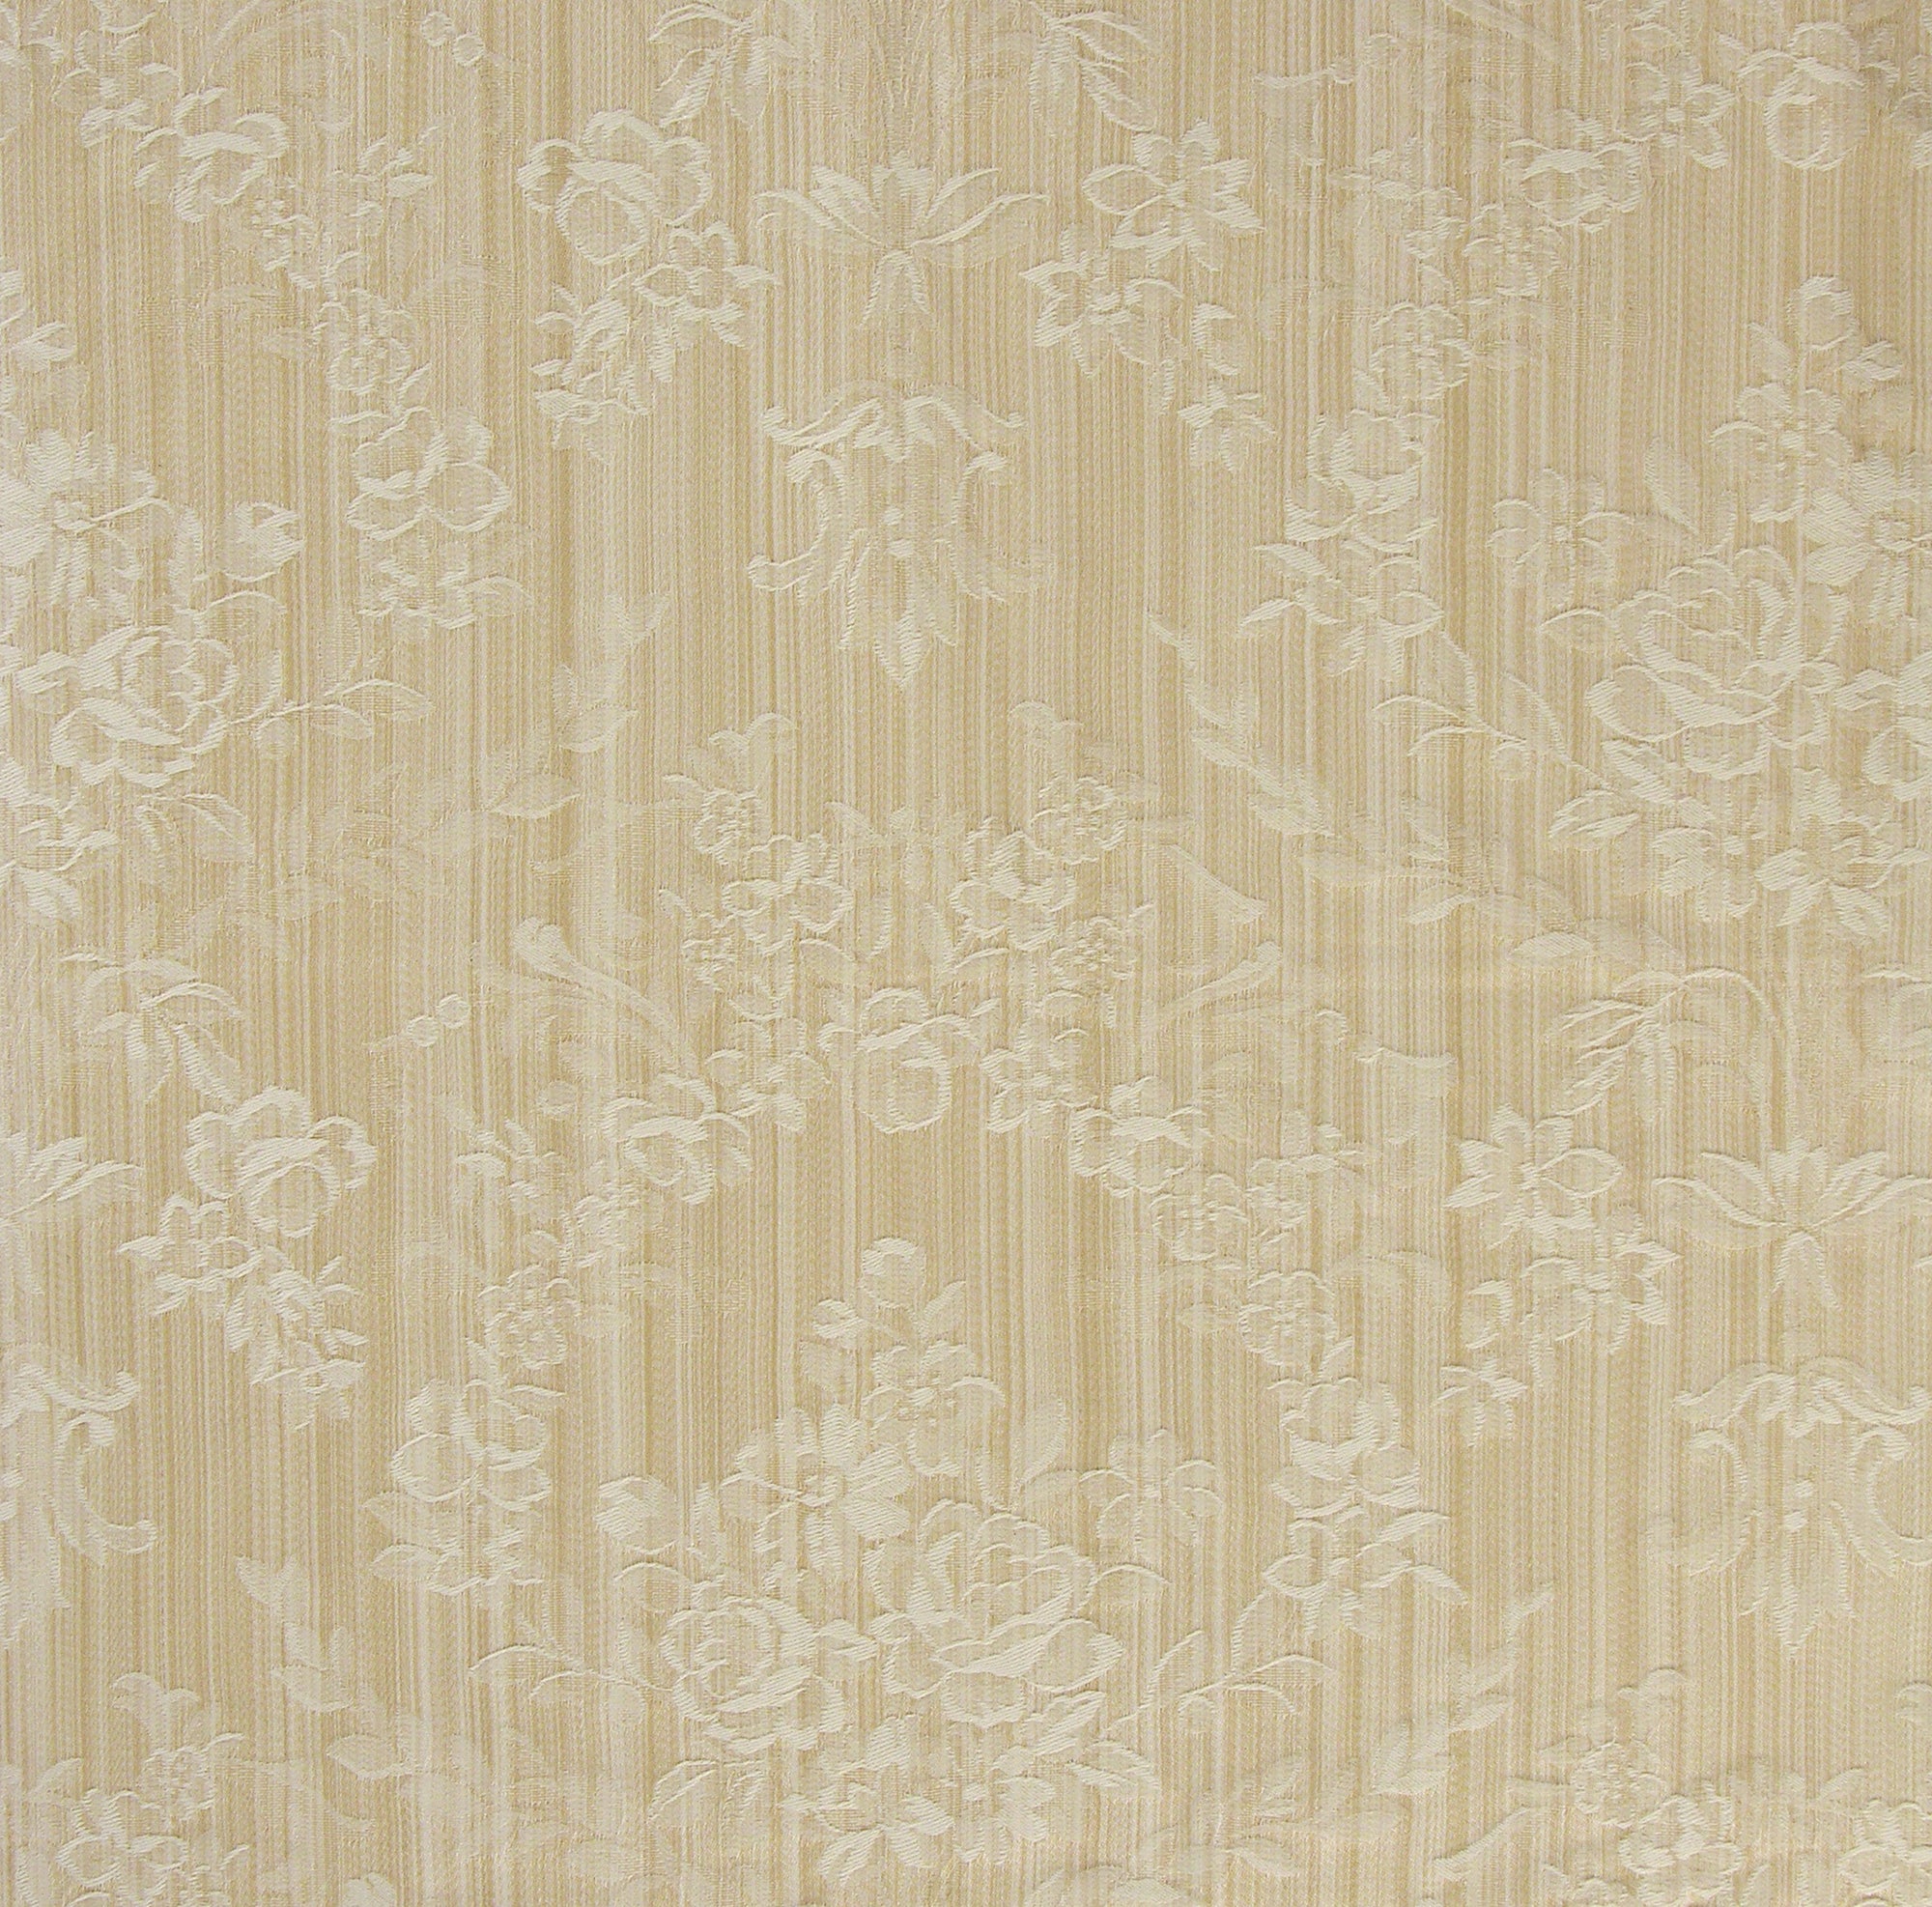 a beige fabric with a subtle floral damask pattern woven into its design